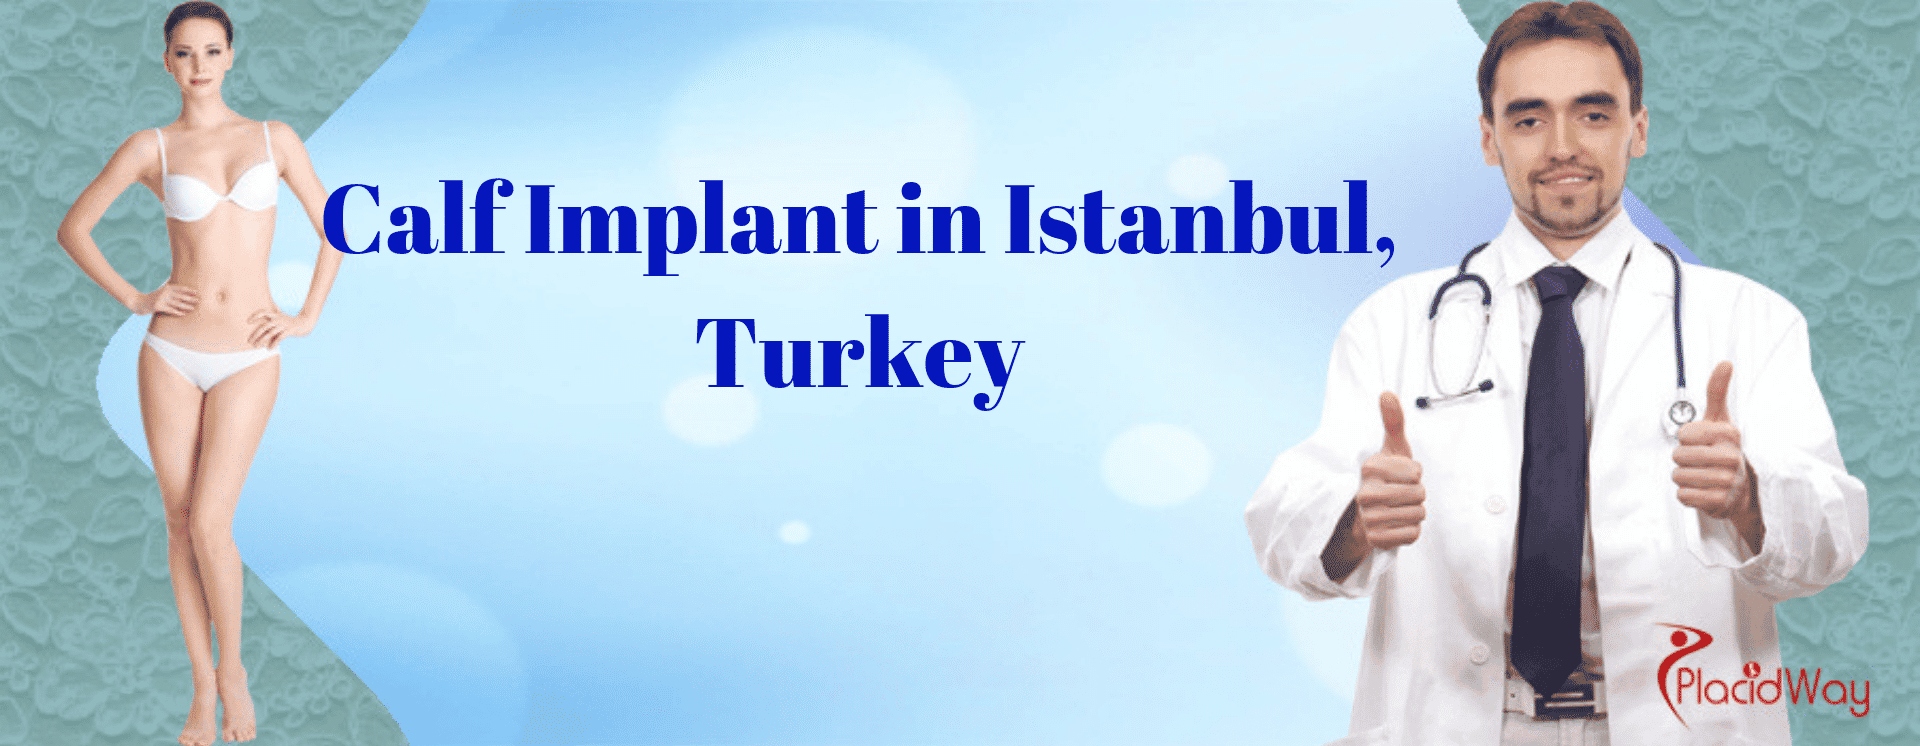 Top-Notch Calf Implant Package in Istanbul, Turkey at Affordable Price